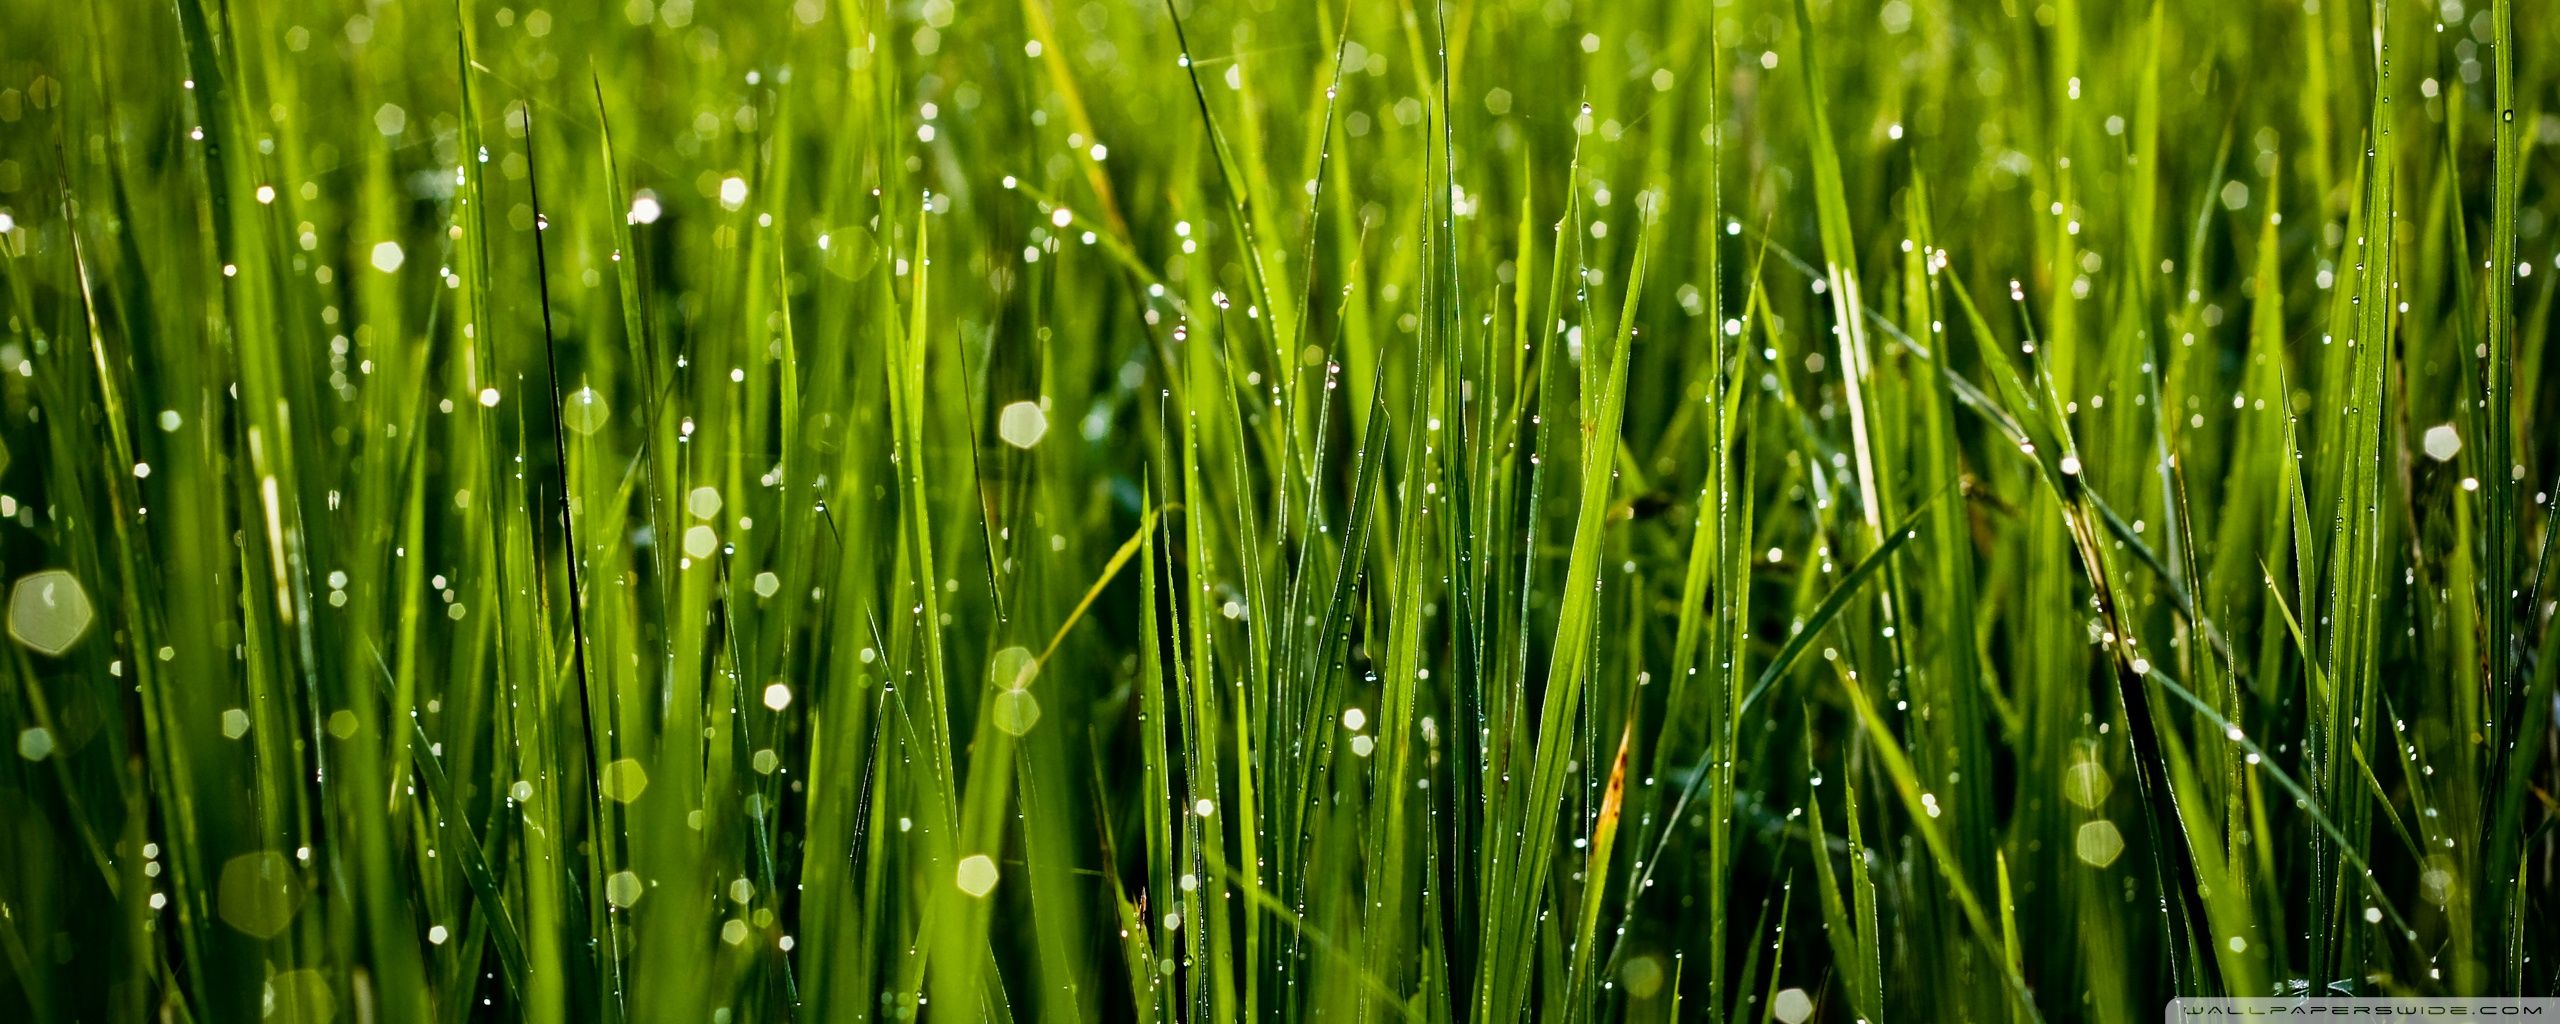 Learn The SkinMedica G R A S S Concept To Keep Your Skin As Fresh And Dewy As This Gorgeous Dewy Grass. Summer Grass, Skin Medica, Desktop Wallpaper Background